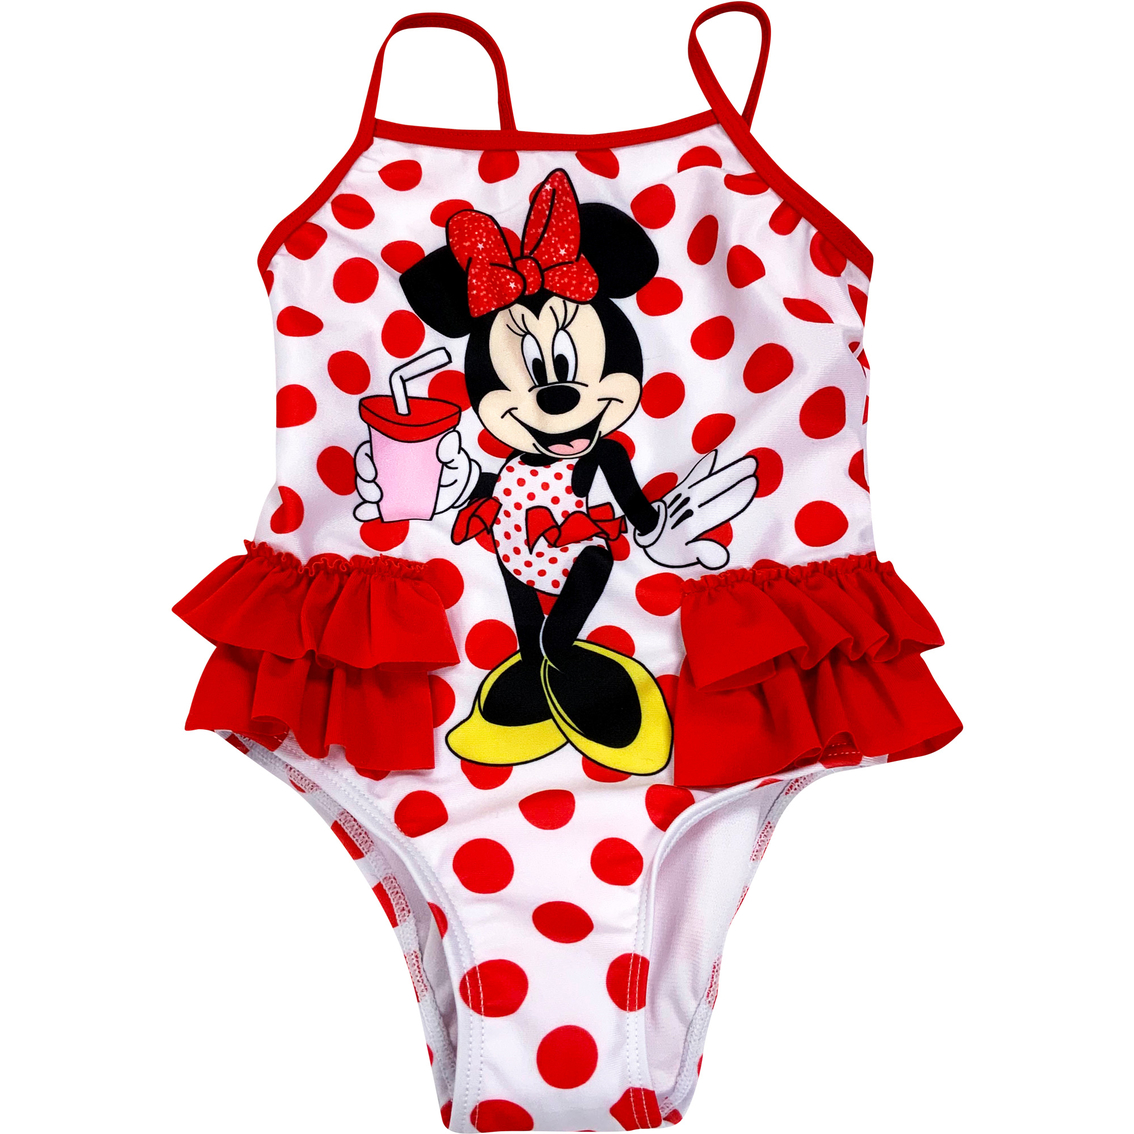 Disney Toddler Girls Minnie Mouse Swimsuit | Toddler Girls 2t-5t ...